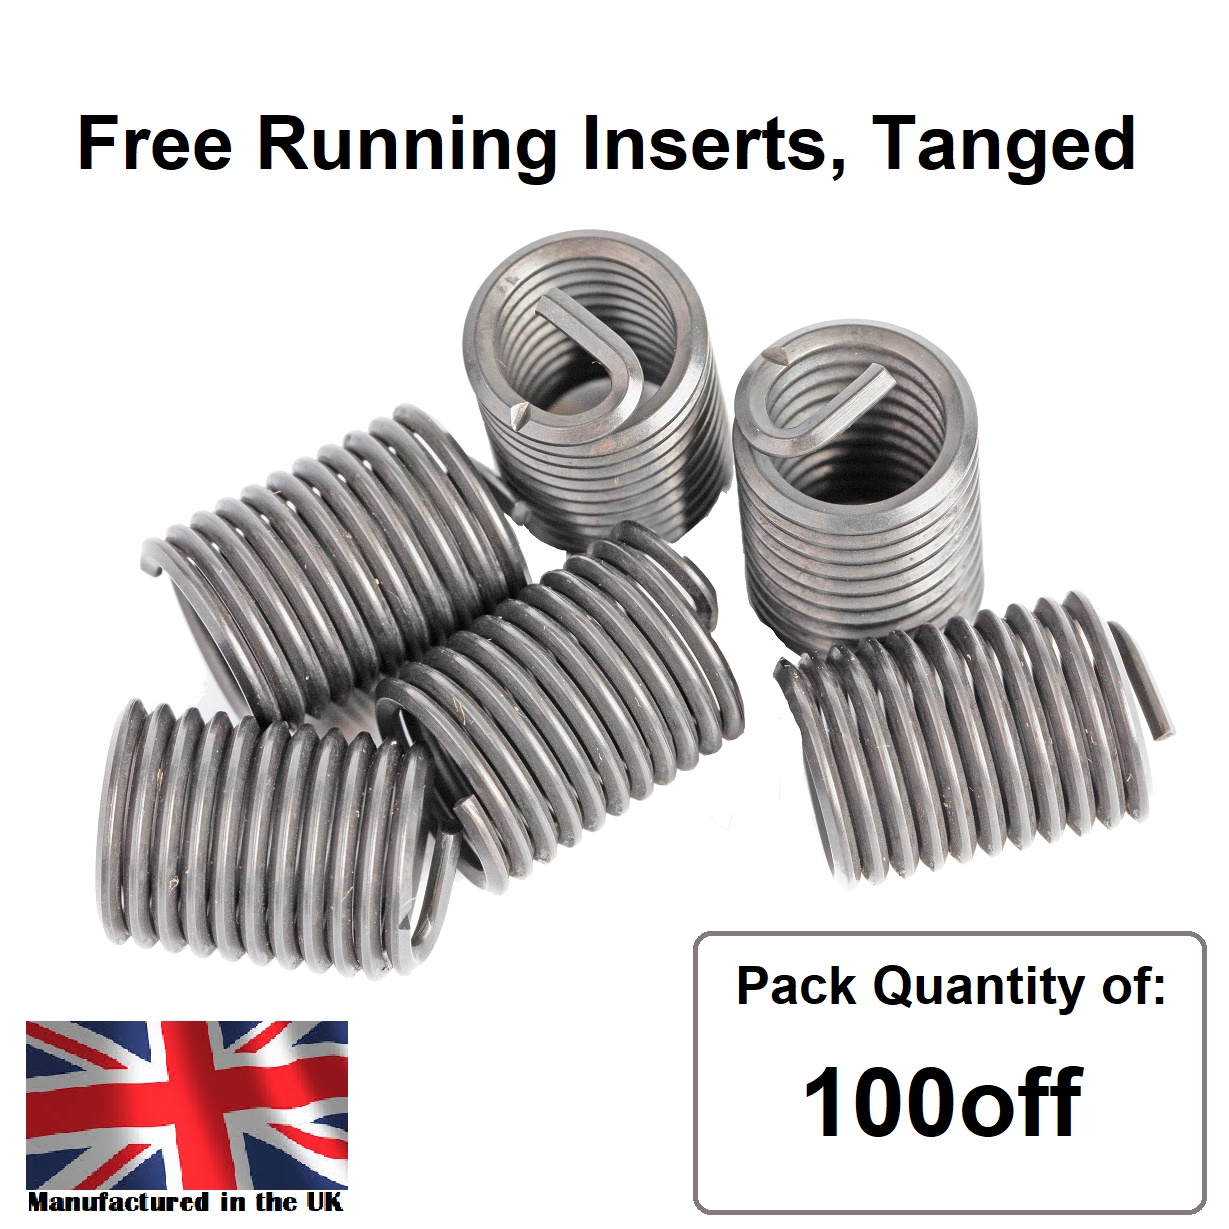 10-24 x 3D UNC, Free Running, Tanged, Wire Thread Repair Insert, 304/A2 Stainless (Pack 100)